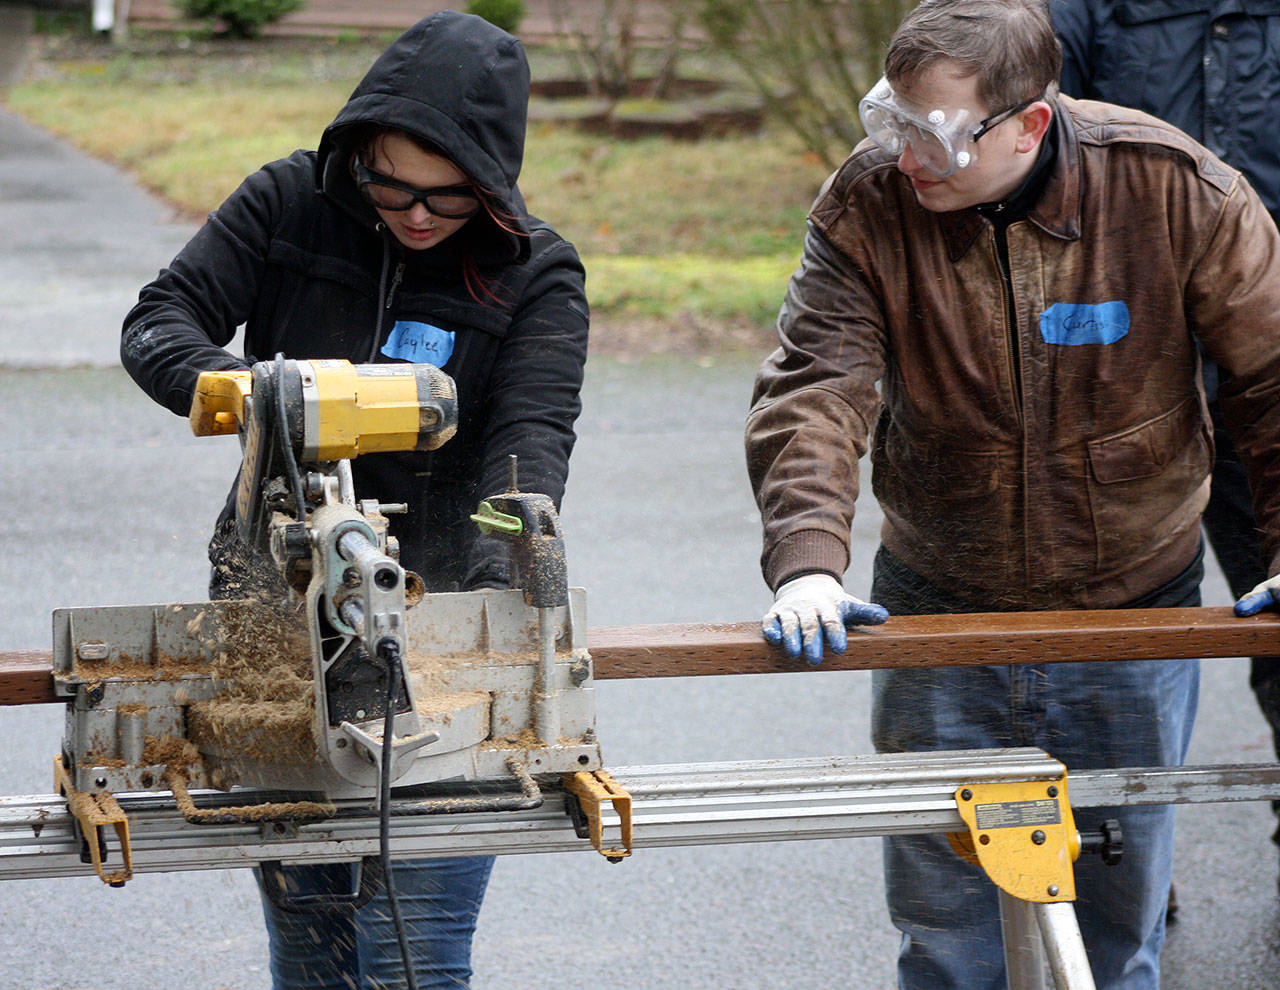 Caylee Kearns, left, cuts a board last Friday for a new deck as Curtiss Nelson assists. Both are among several volunteers from Wells Fargo helping to redo steps, install a ramp and build a deck for military veteran Lina Paulgen at her East Hill home in Kent. STEVE HUNTER, Kent Reporter